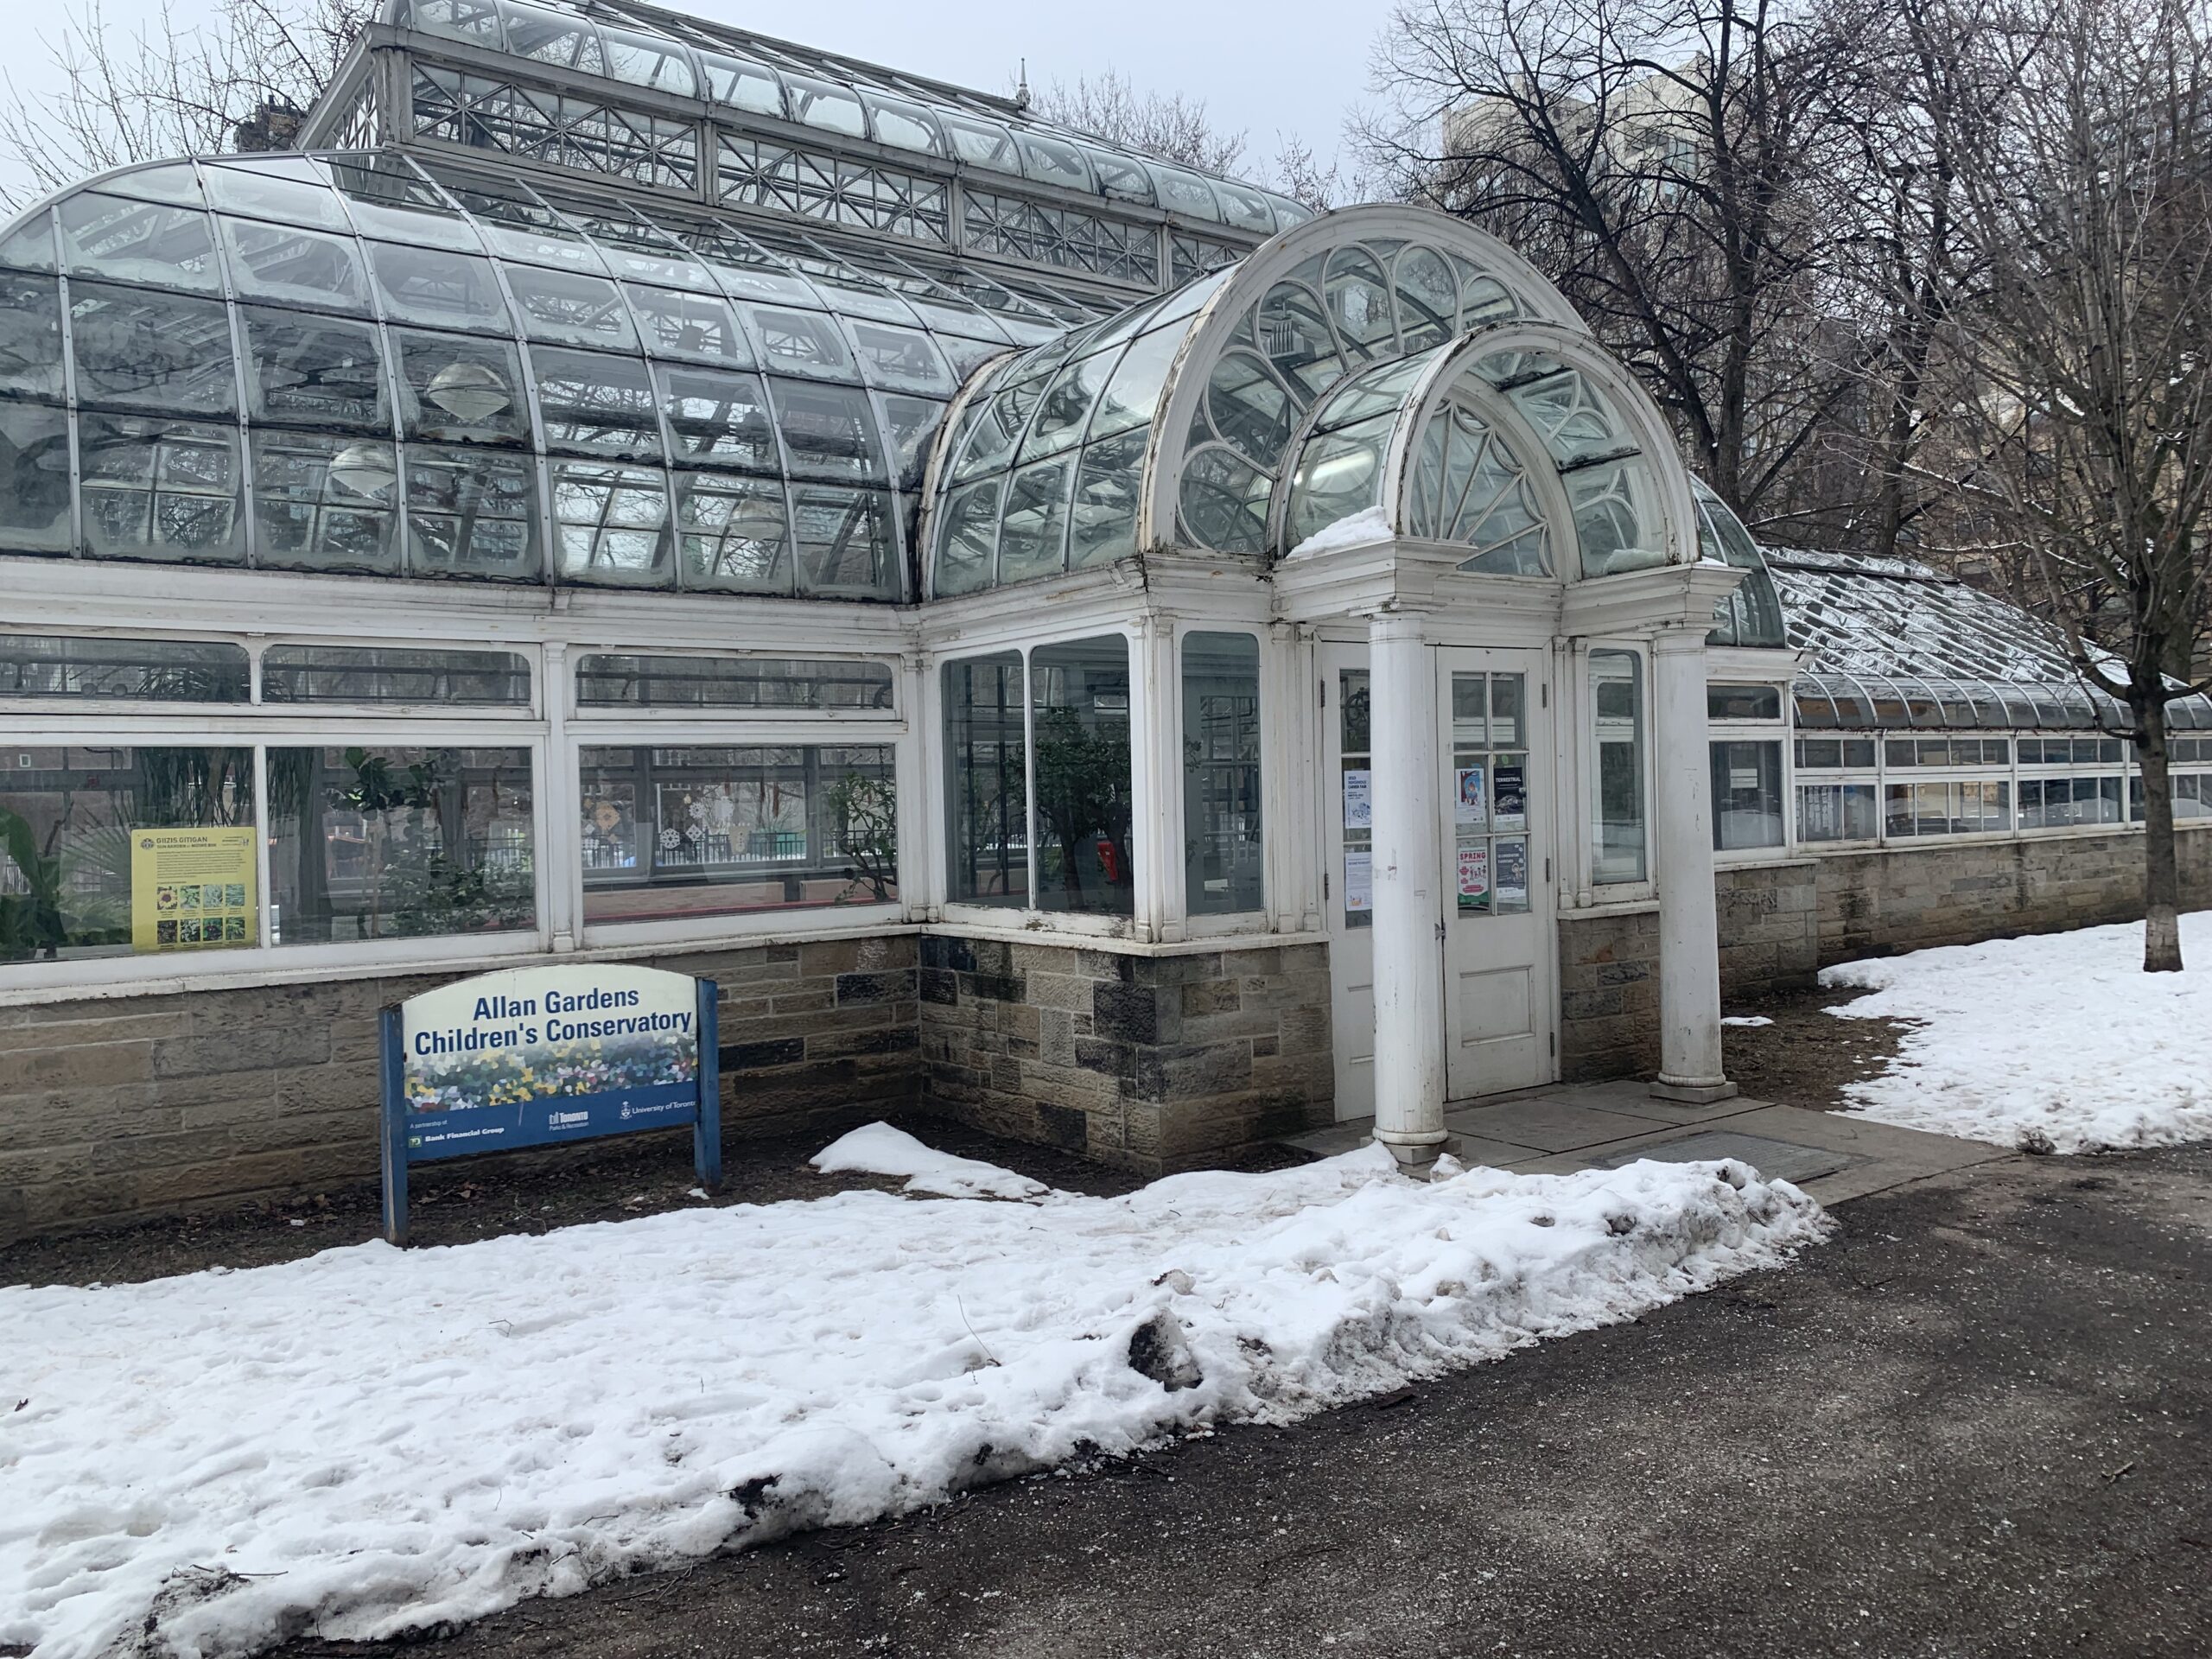 Image of the entrance to the Children's Conservatory, a Victorian-era greenhouse with an ornate entrance made of glass with columns, and a blue sign to the left of the main entrance.